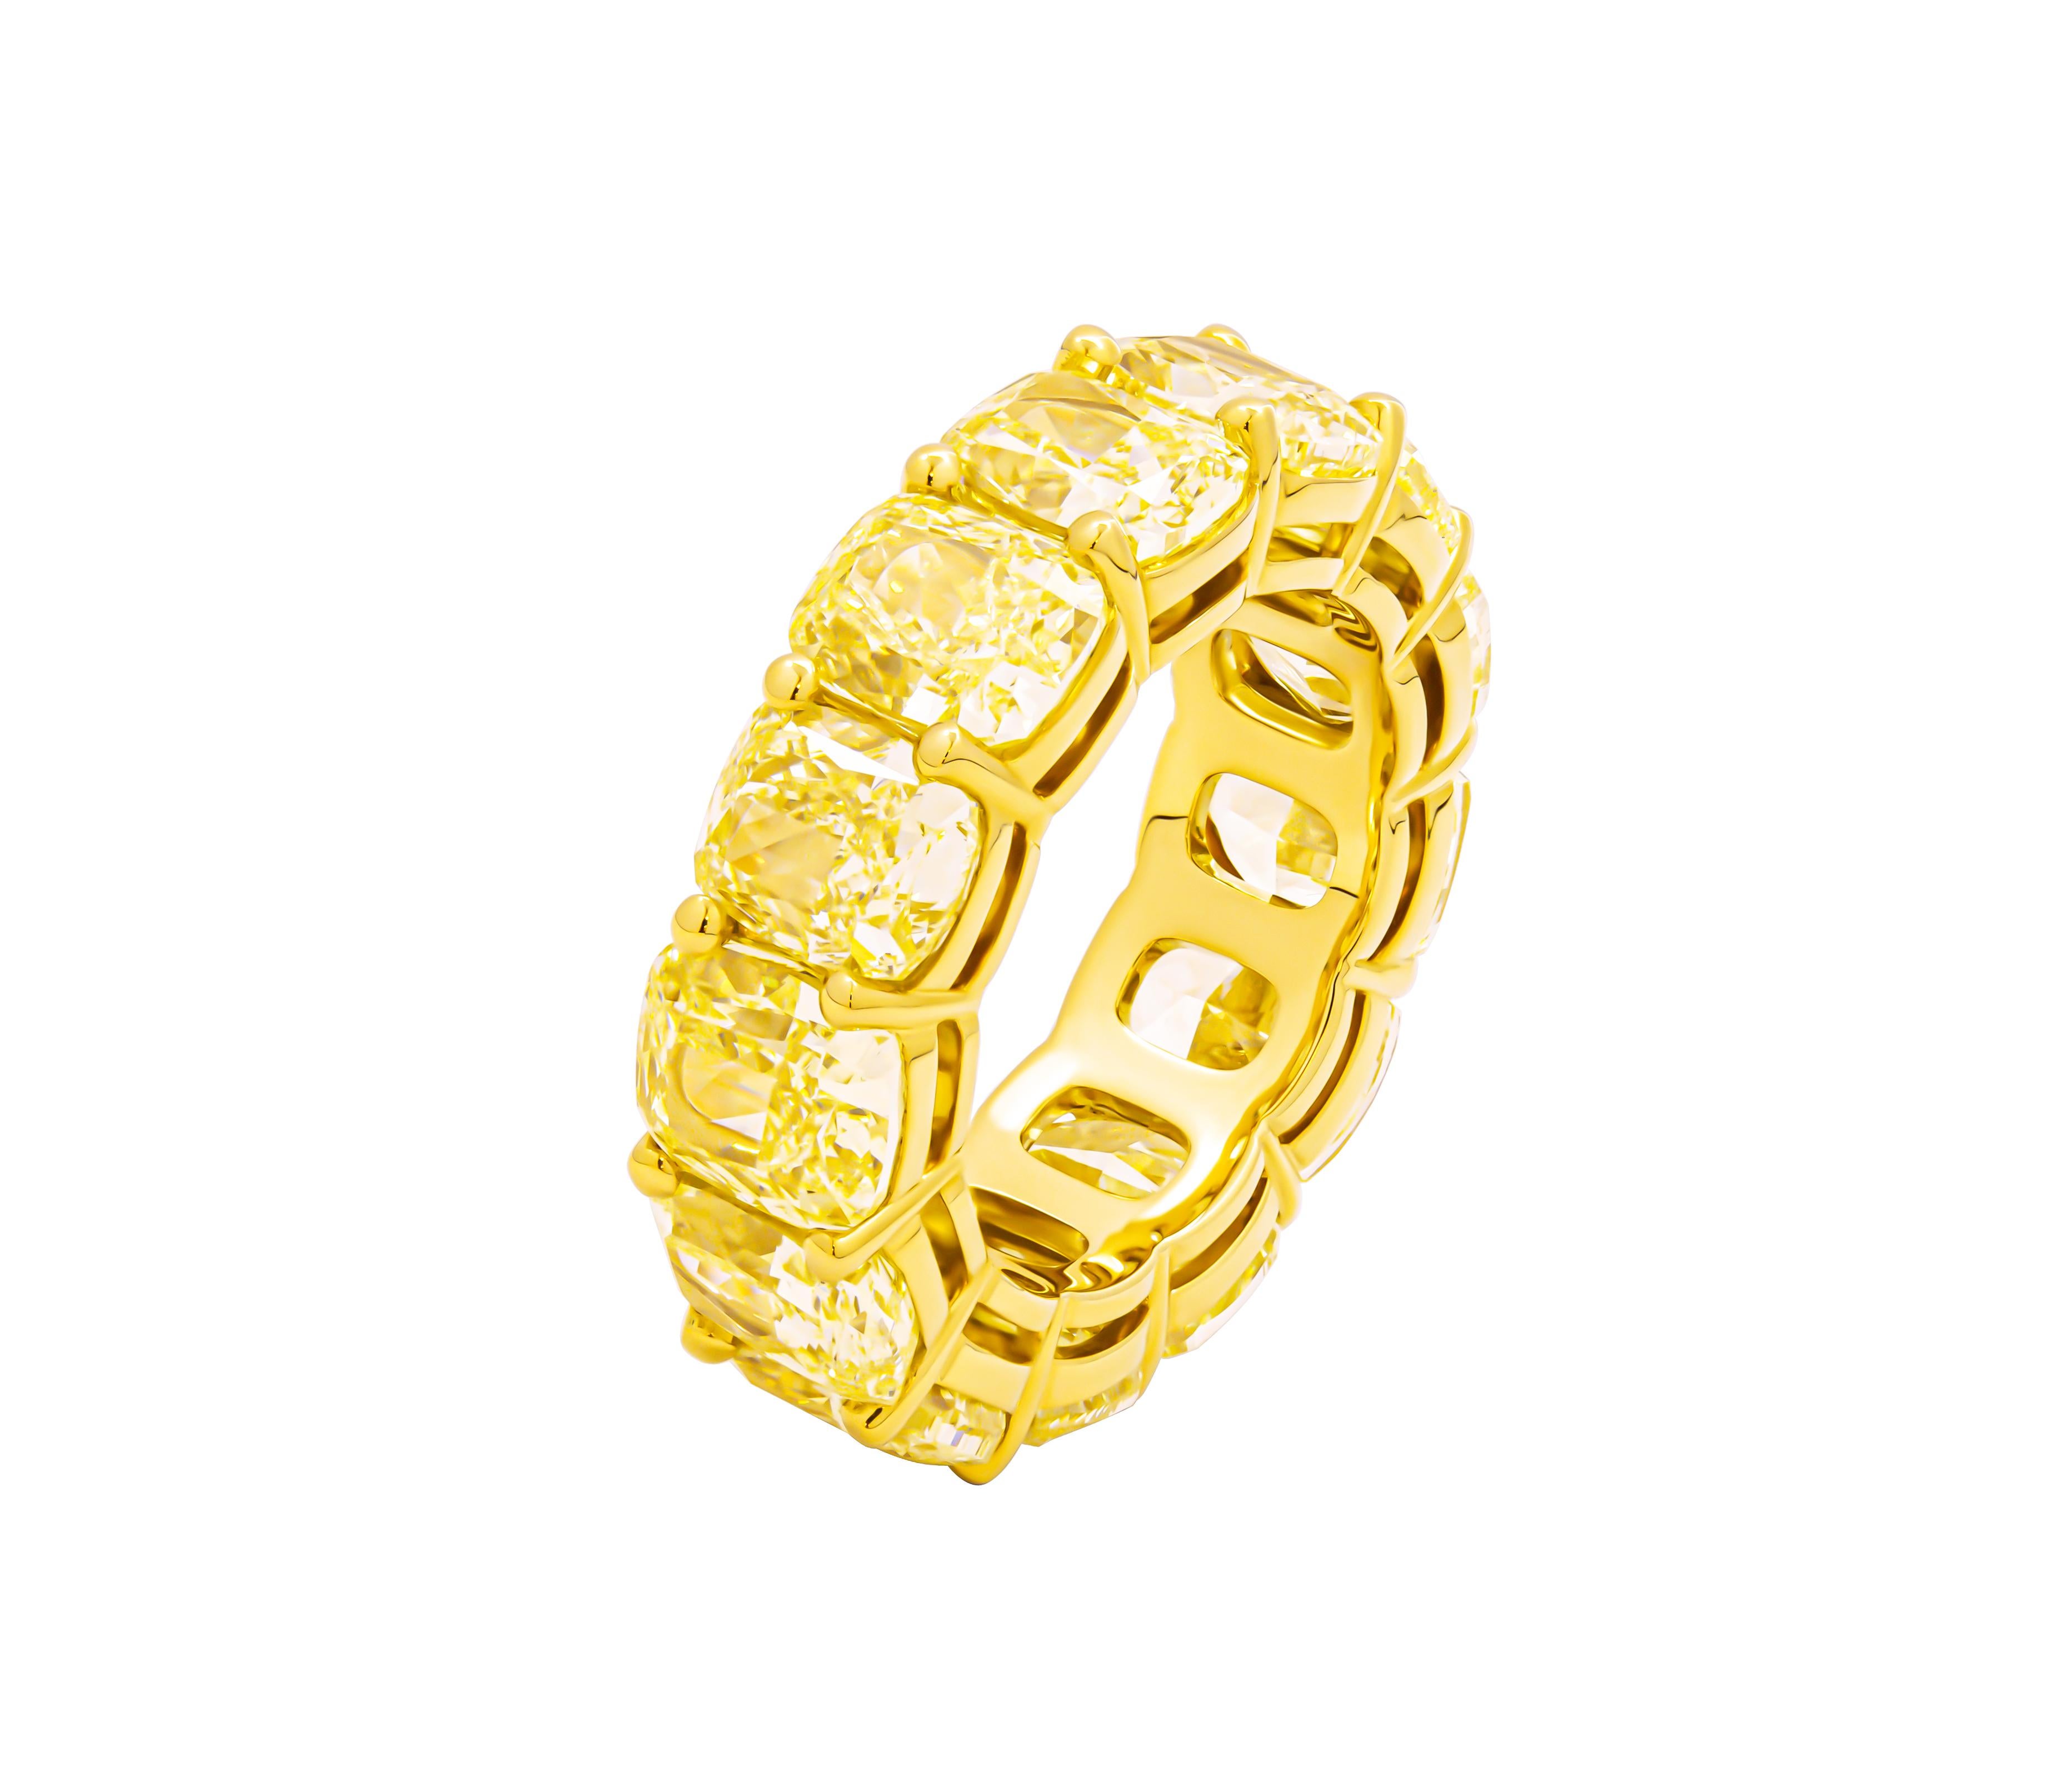 Indulge in everlasting elegance with this stunning Eternity wedding band, meticulously crafted in luxurious 18k yellow gold. Each enchanting cushion-cut diamond, ranging from 1.02 to 1.41 carats, is certified by the esteemed Gemological Institute of